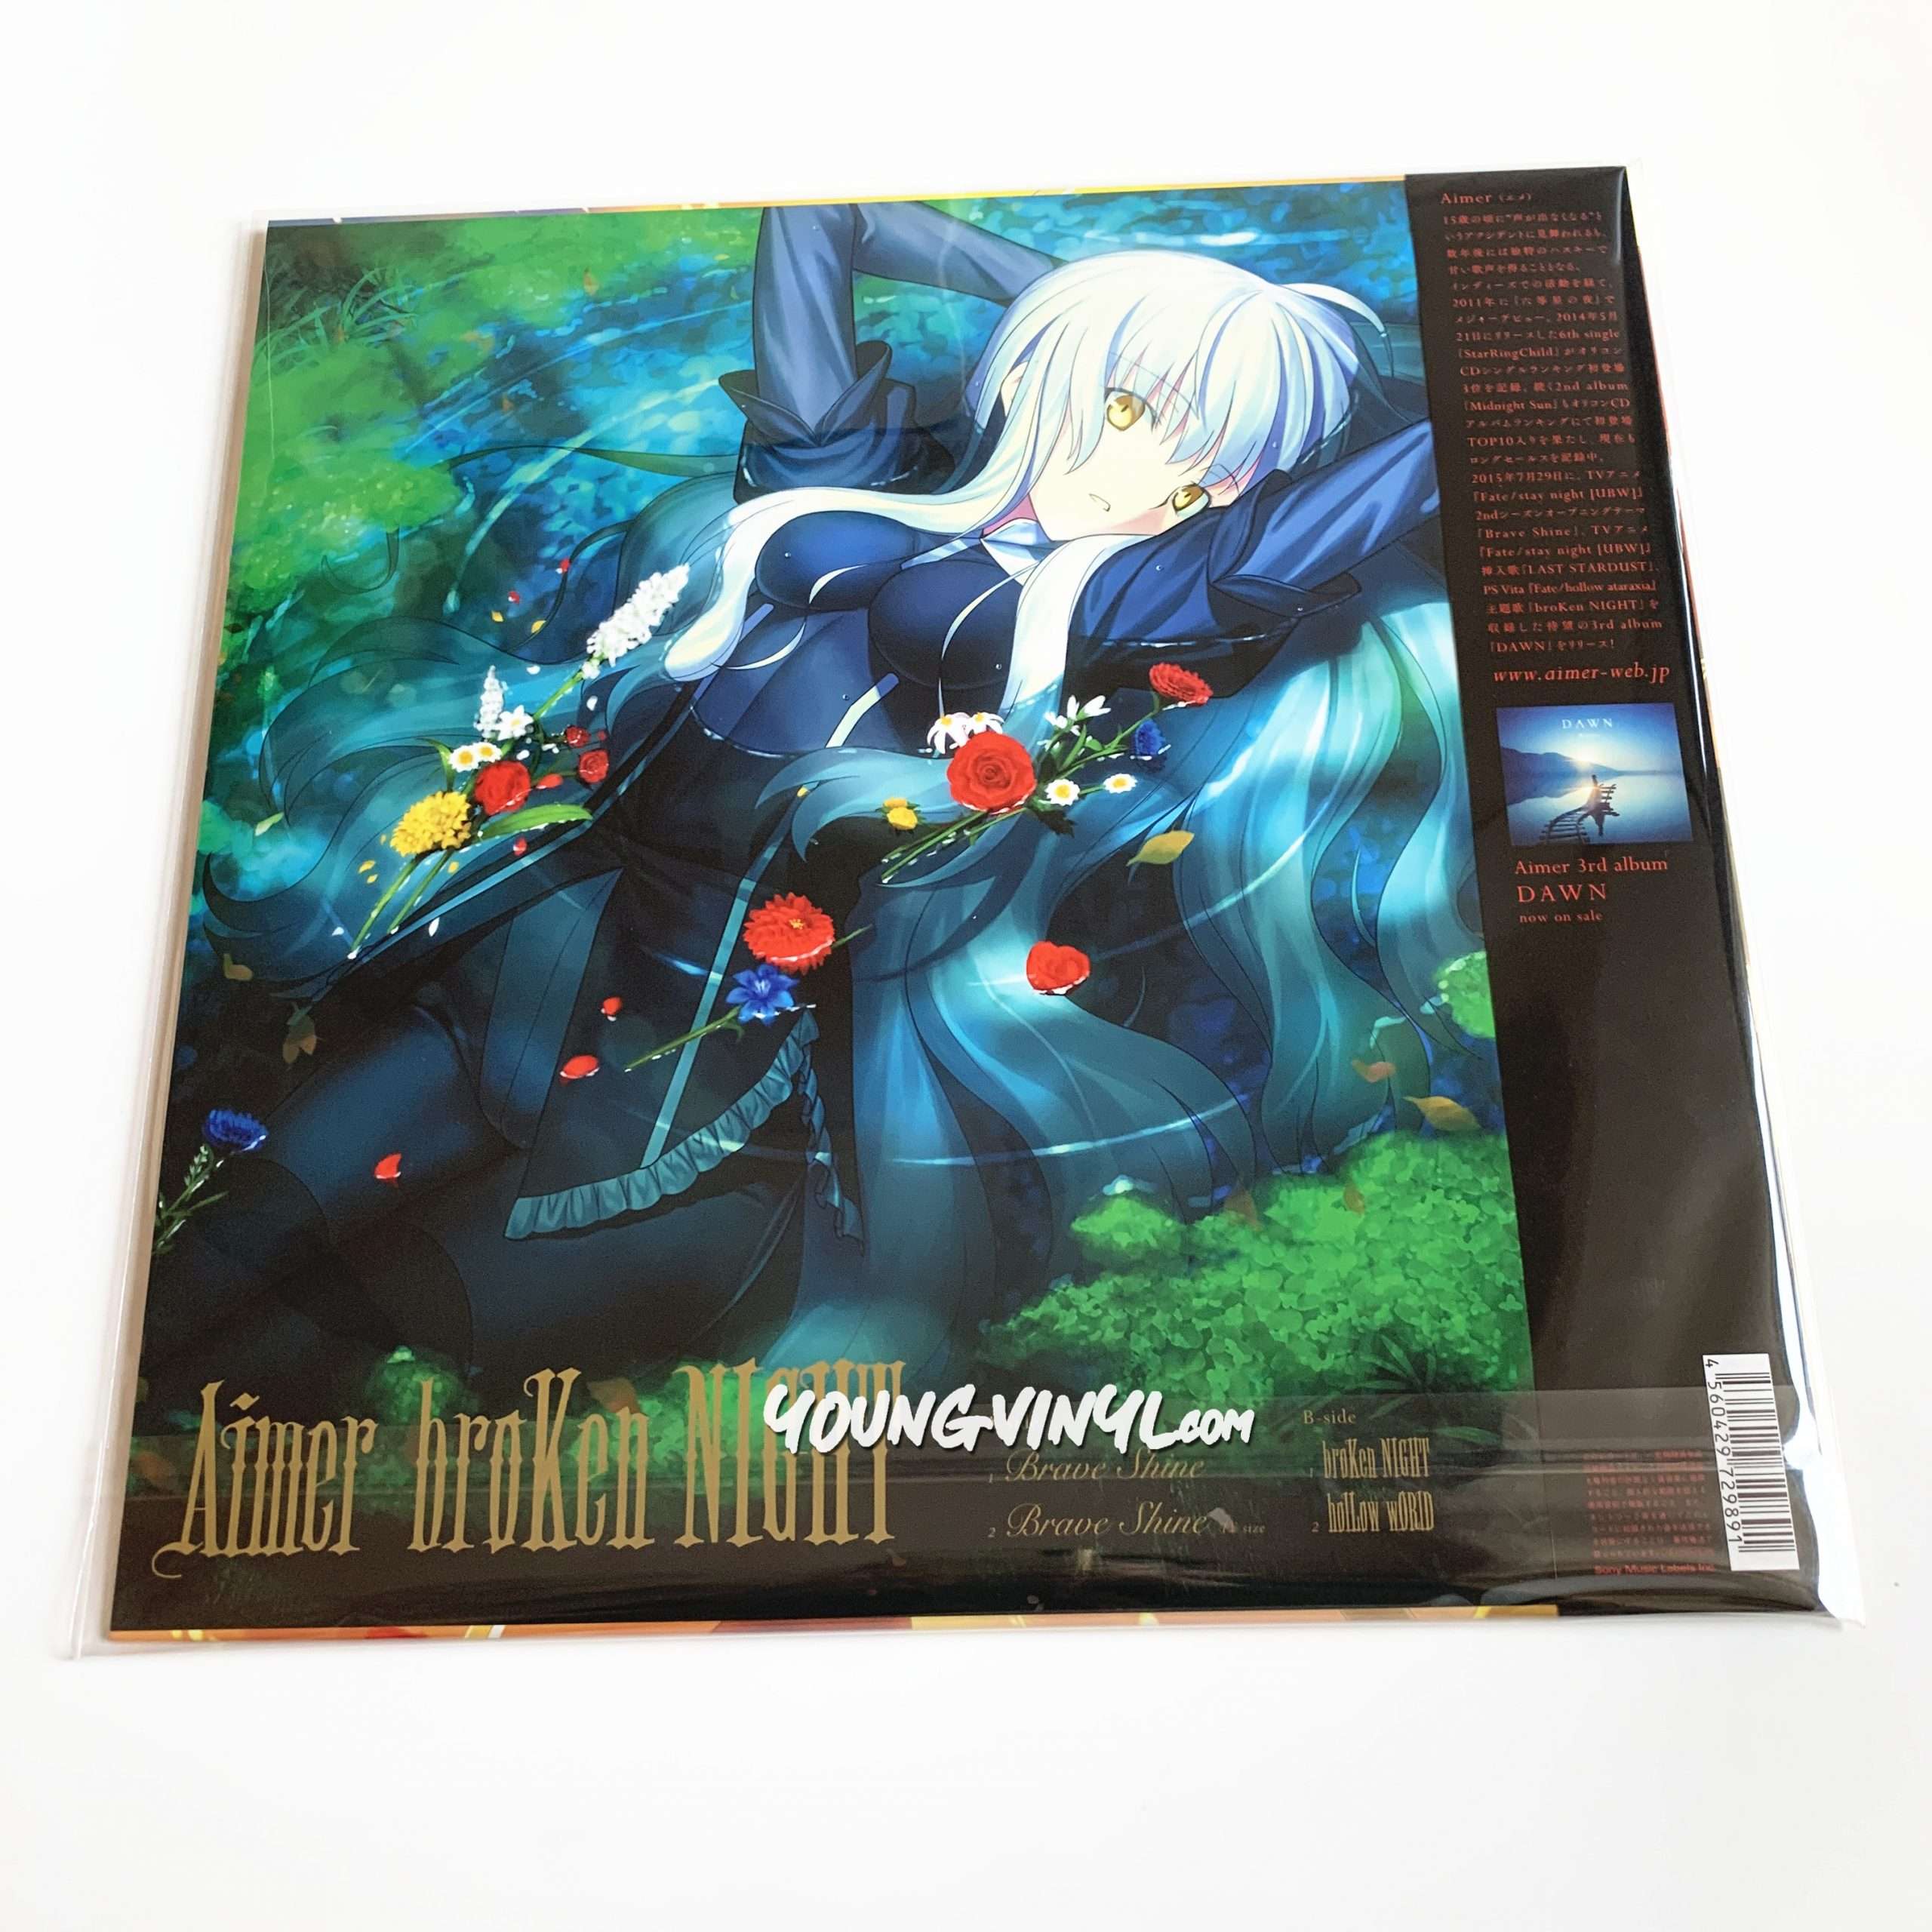 Aimer Brave Shine Limited Vinyl Fate Stay Night Op Young Vinyl